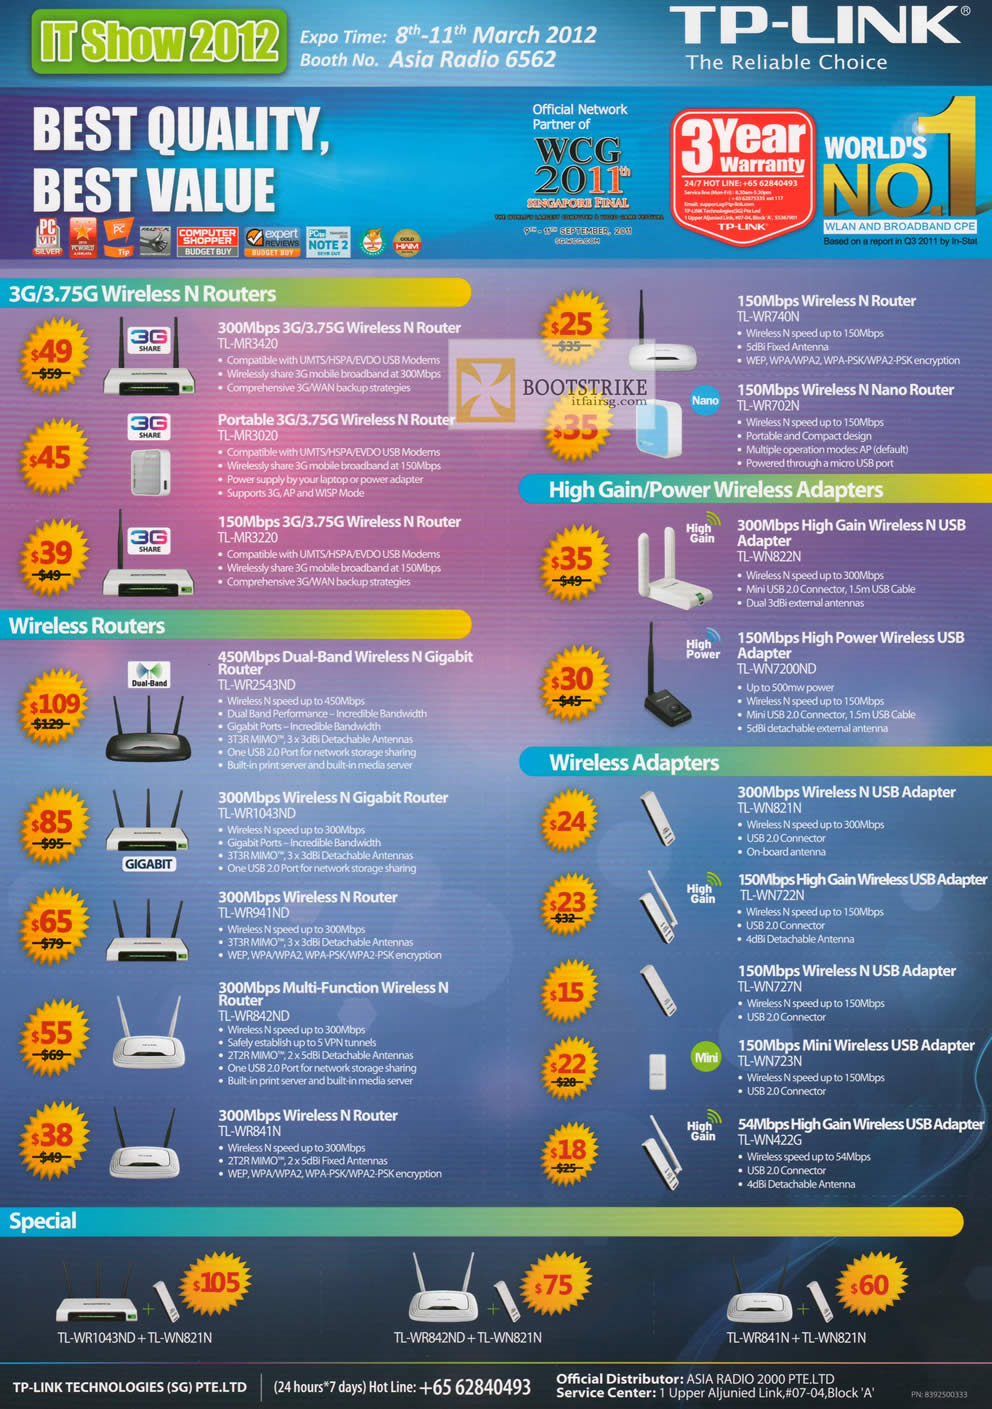 IT SHOW 2012 price list image brochure of Asia Radio TP-Link Wireless N Router, USB Wireless Adapter, Routers, TL-WR2543ND, TL-WR1043ND